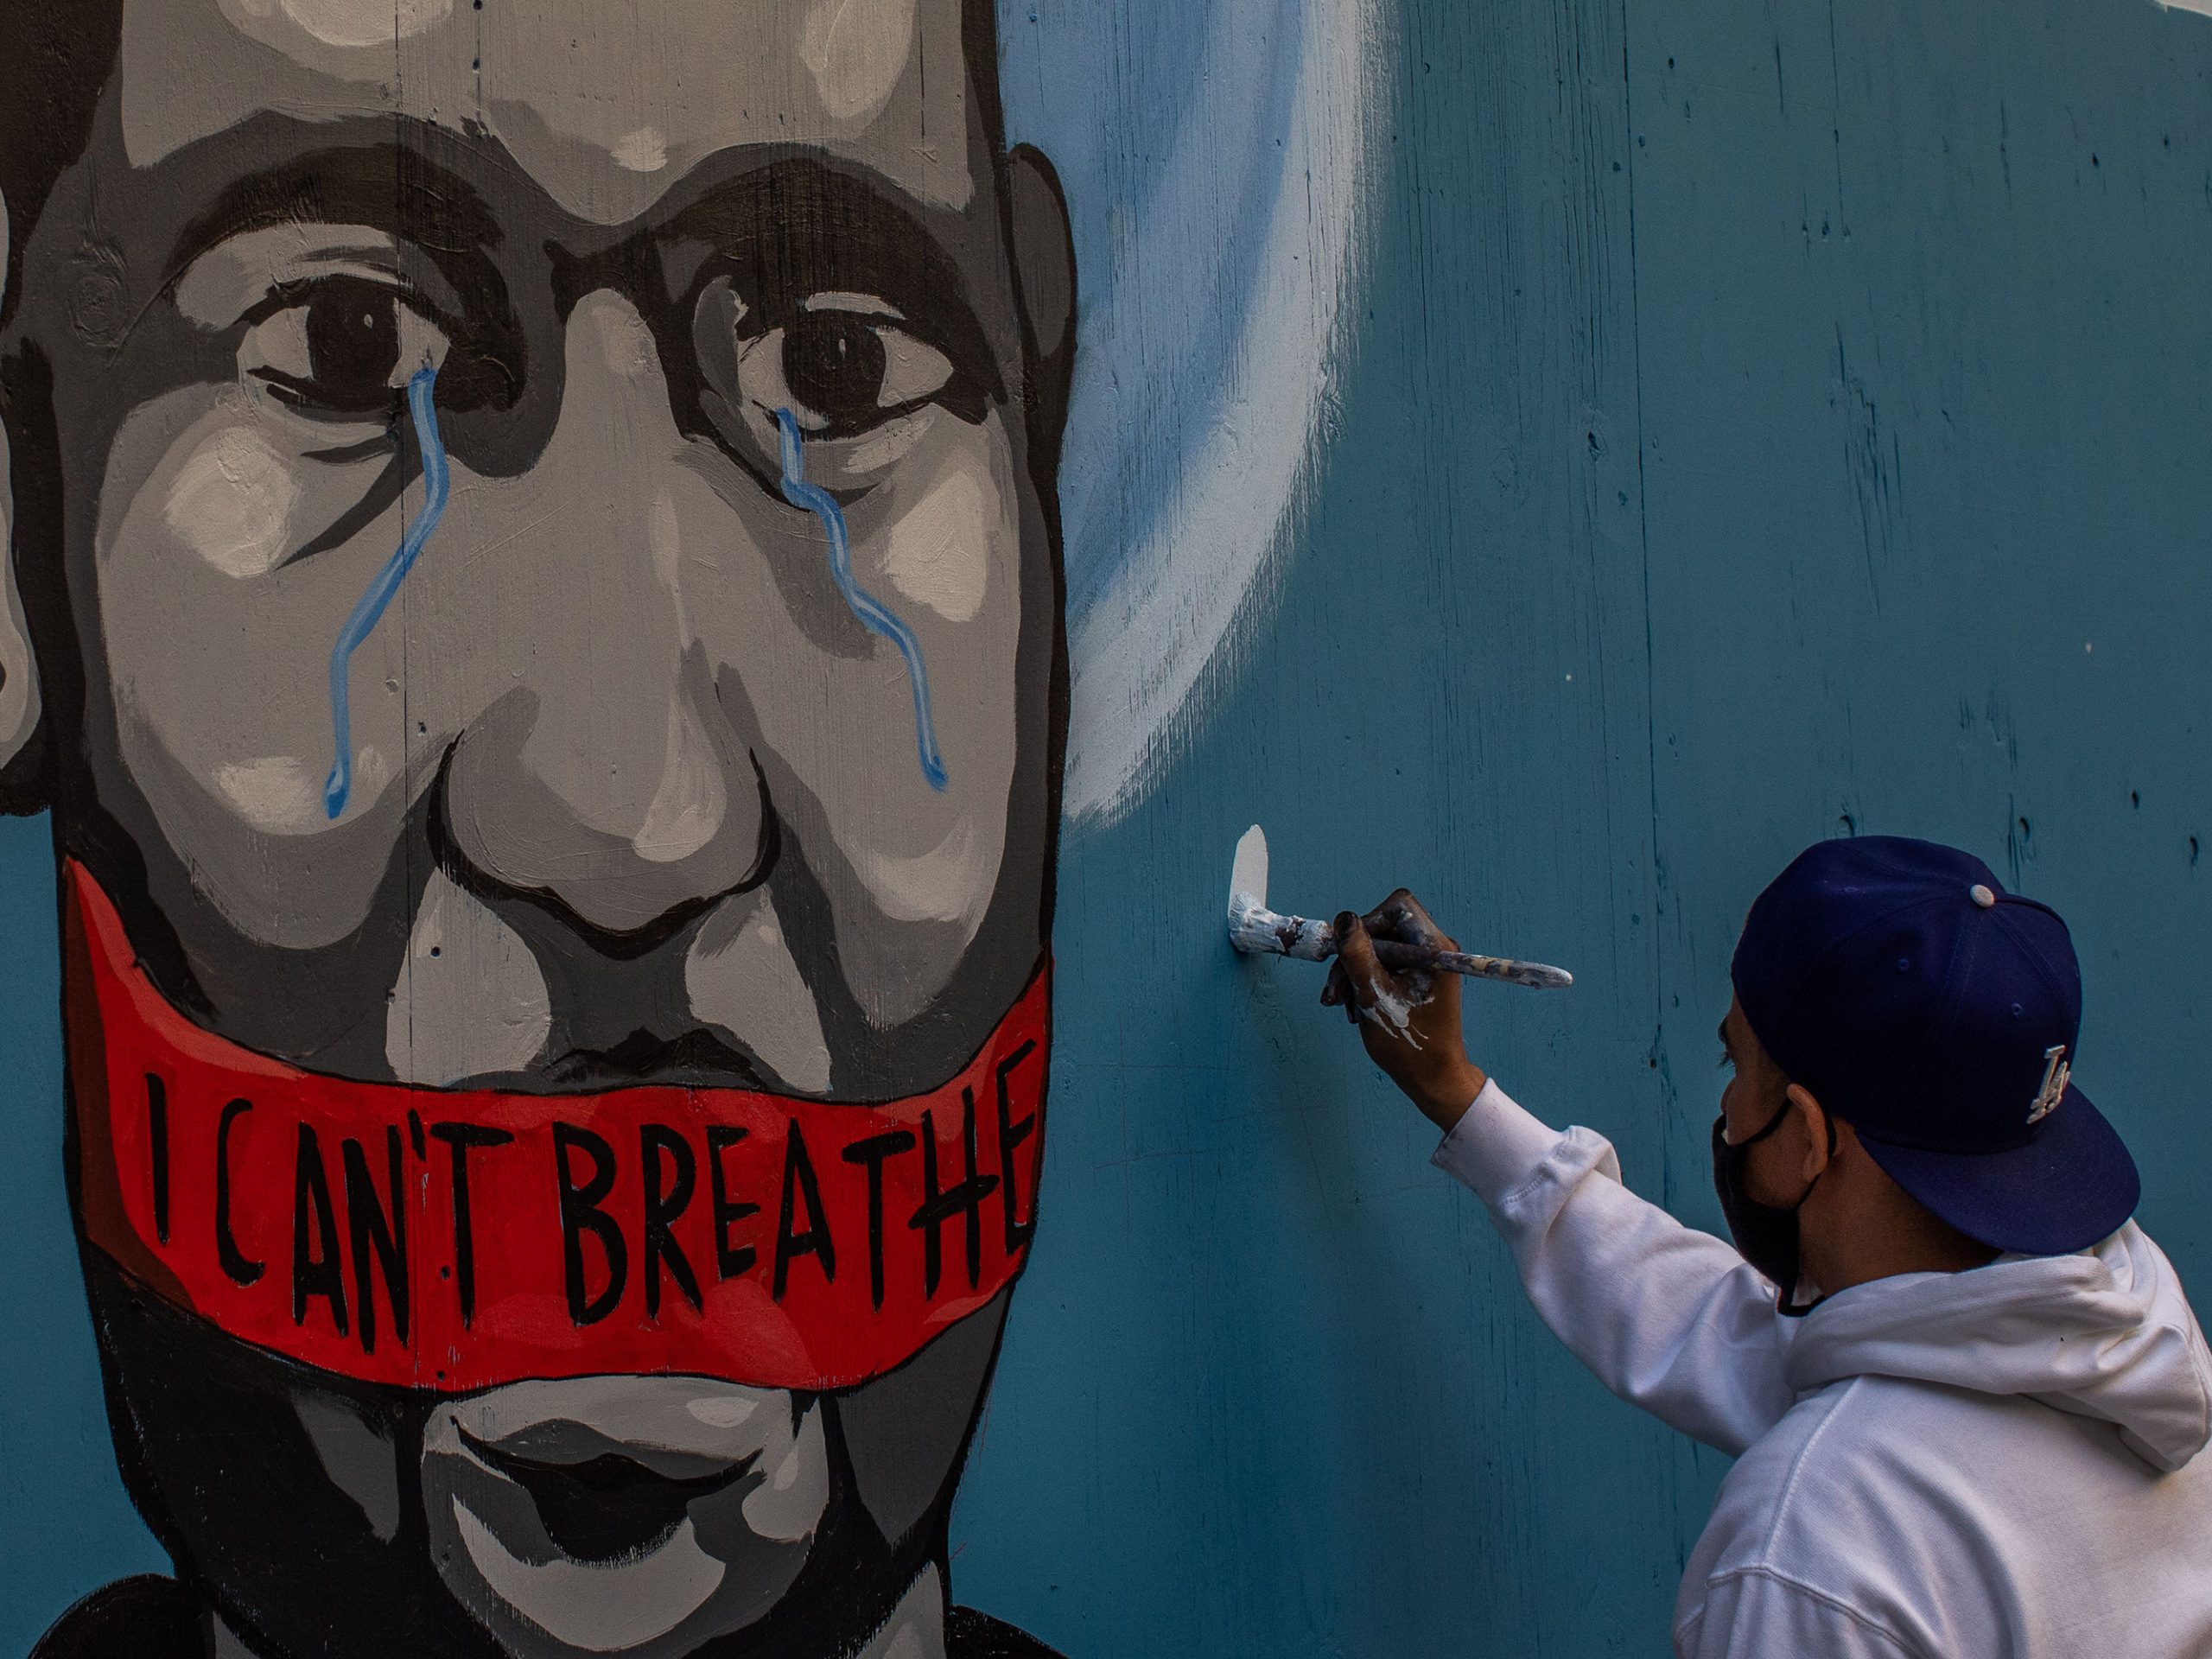 The artist Celos paints a mural in downtown Los Angeles on May 30, 2020 in protest against the killing of George Floyd by police in Minneapolis.